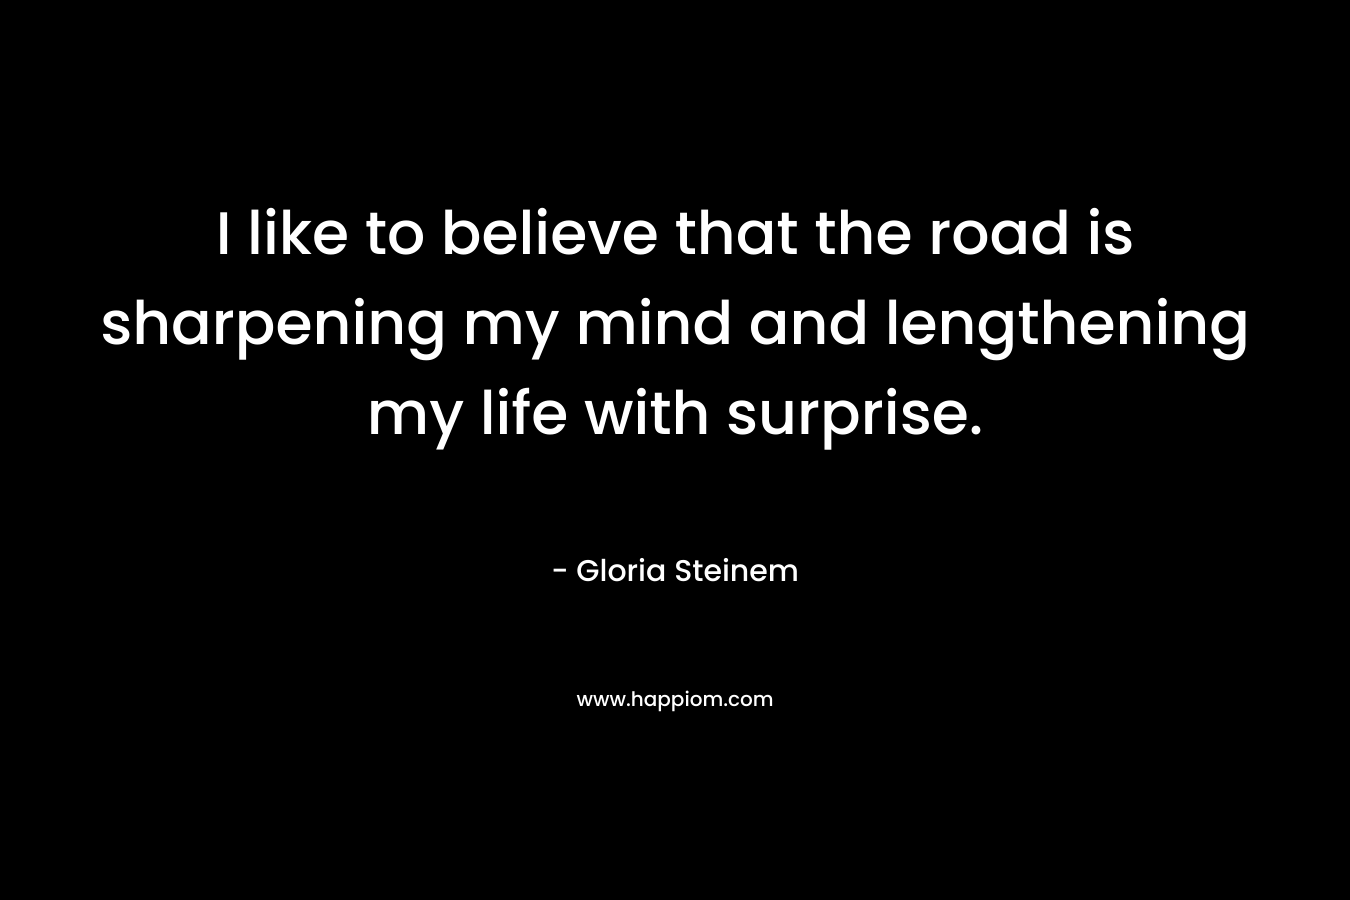 I like to believe that the road is sharpening my mind and lengthening my life with surprise. – Gloria Steinem